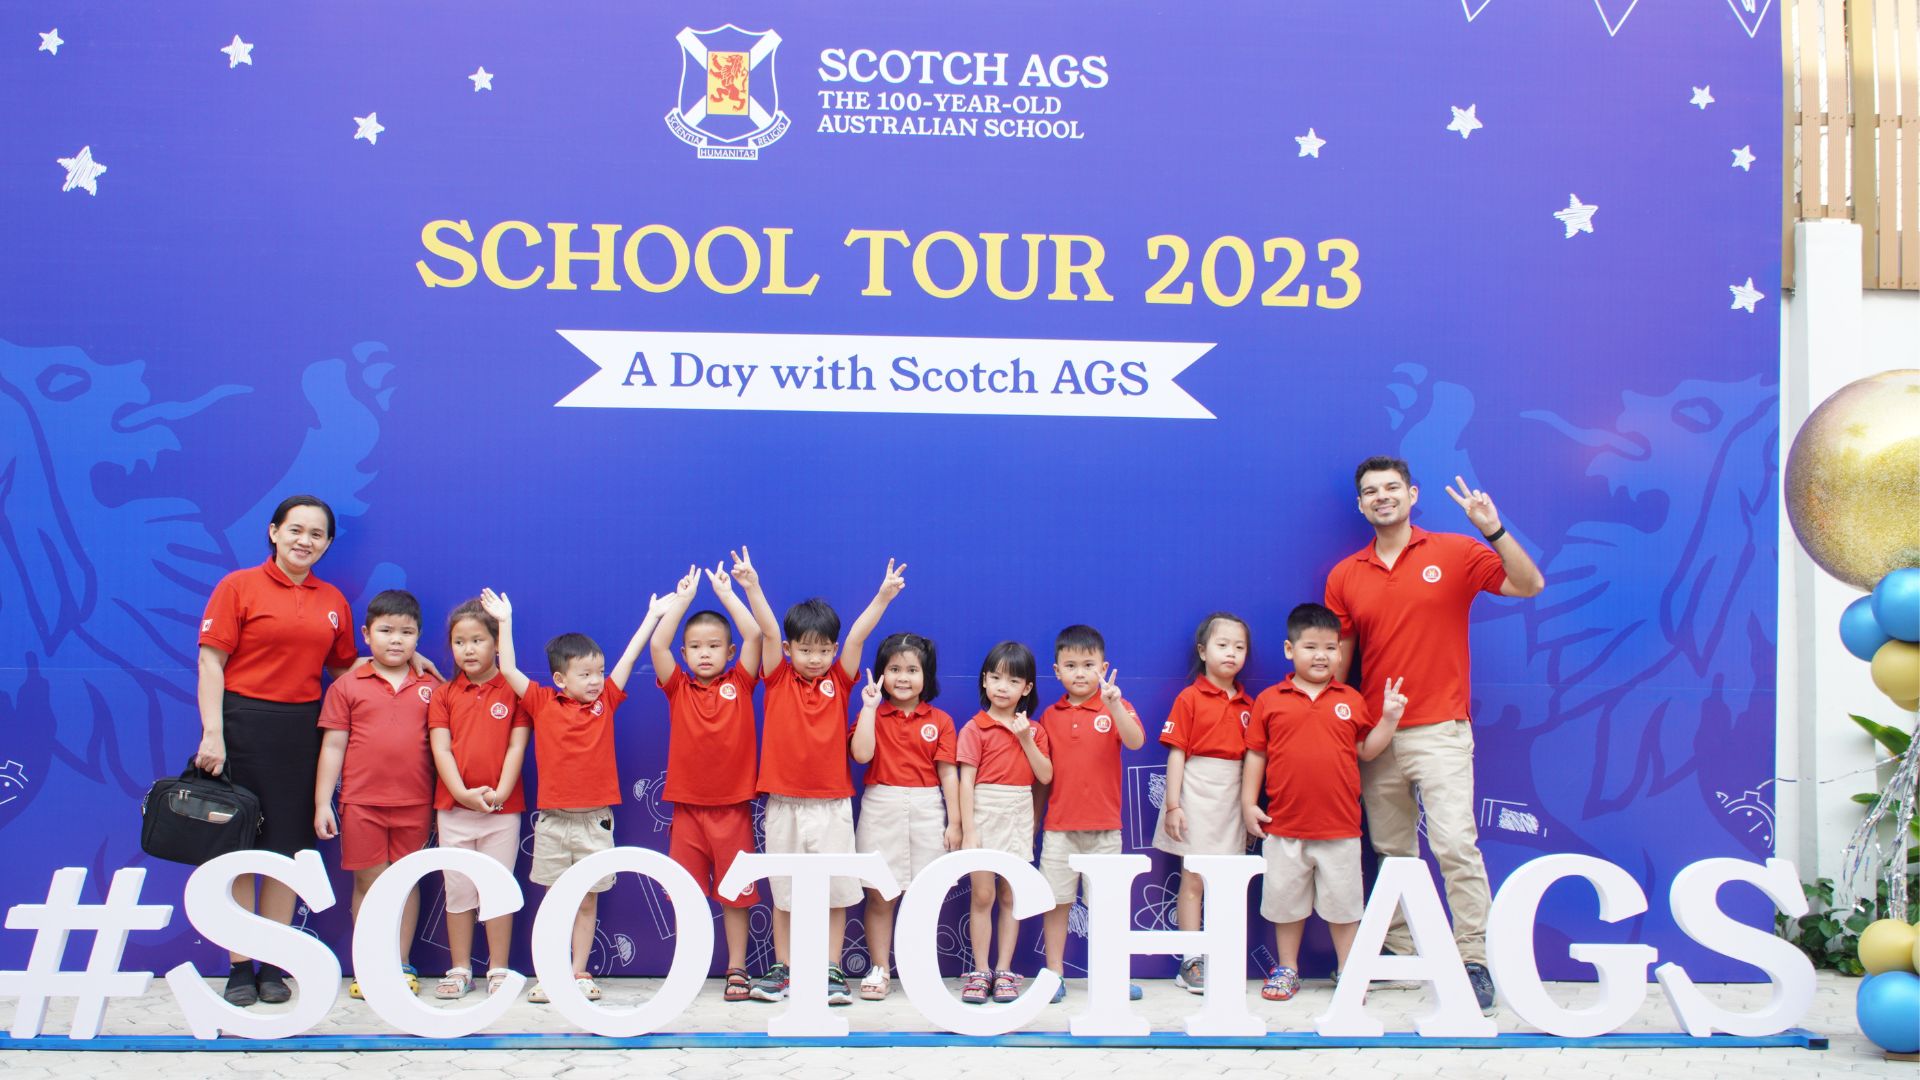 School tour 2023 - A Day with Scotch AGS